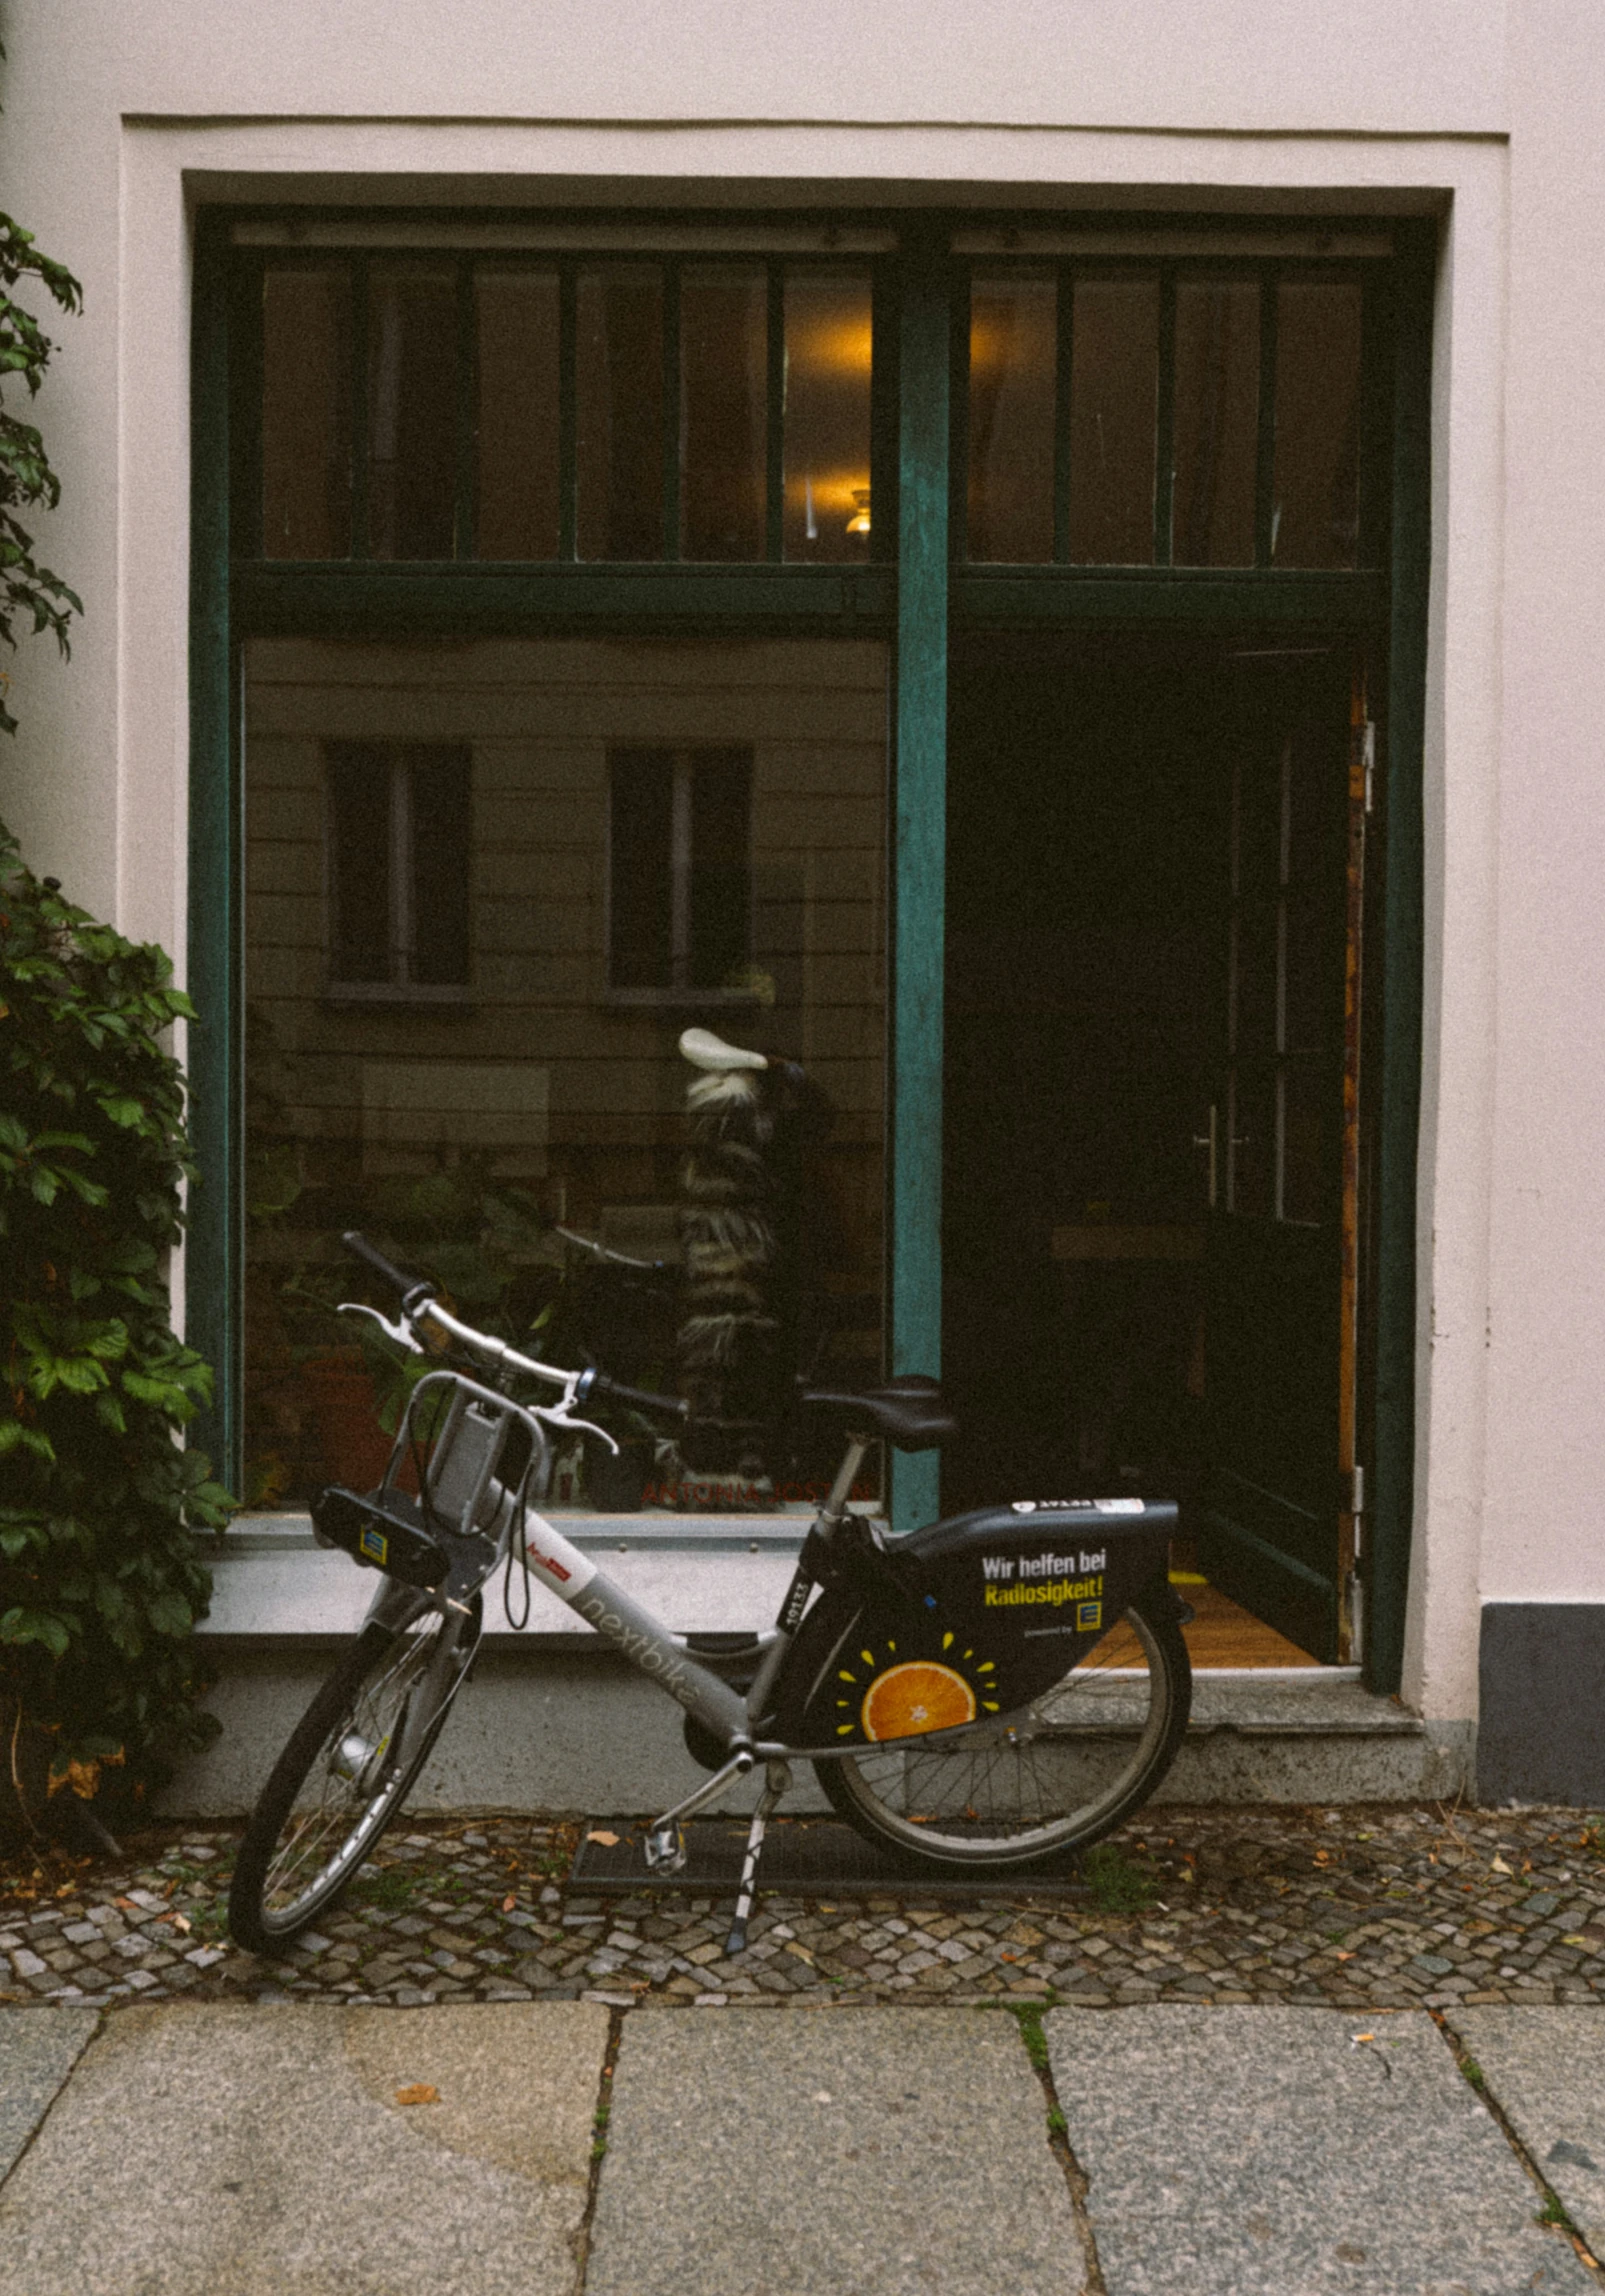 a bicycle parked in front of an open window